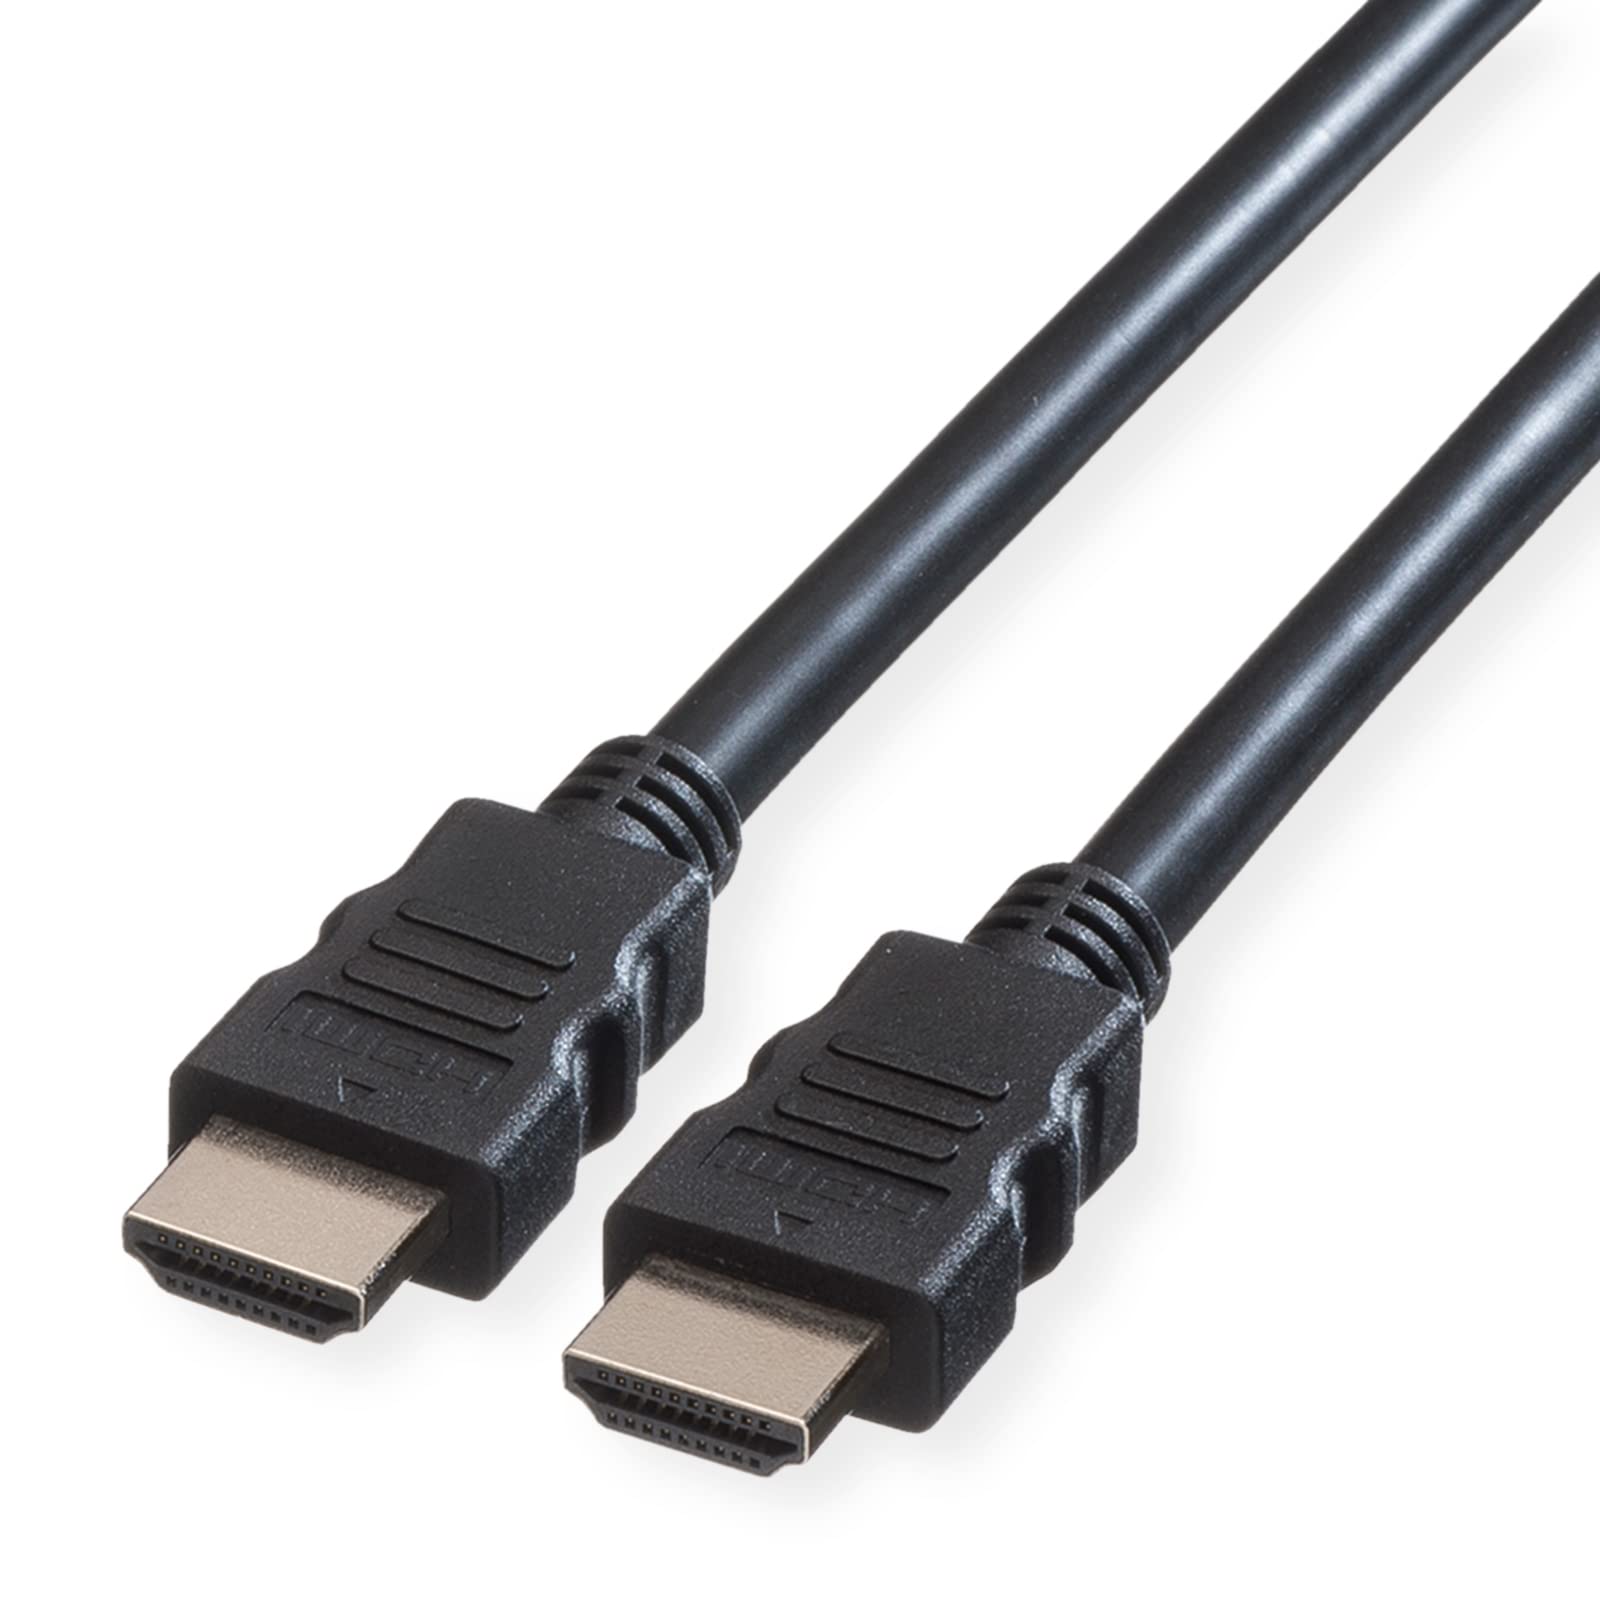 2 MT-PRO HDMI HIGH SPEED CABLE